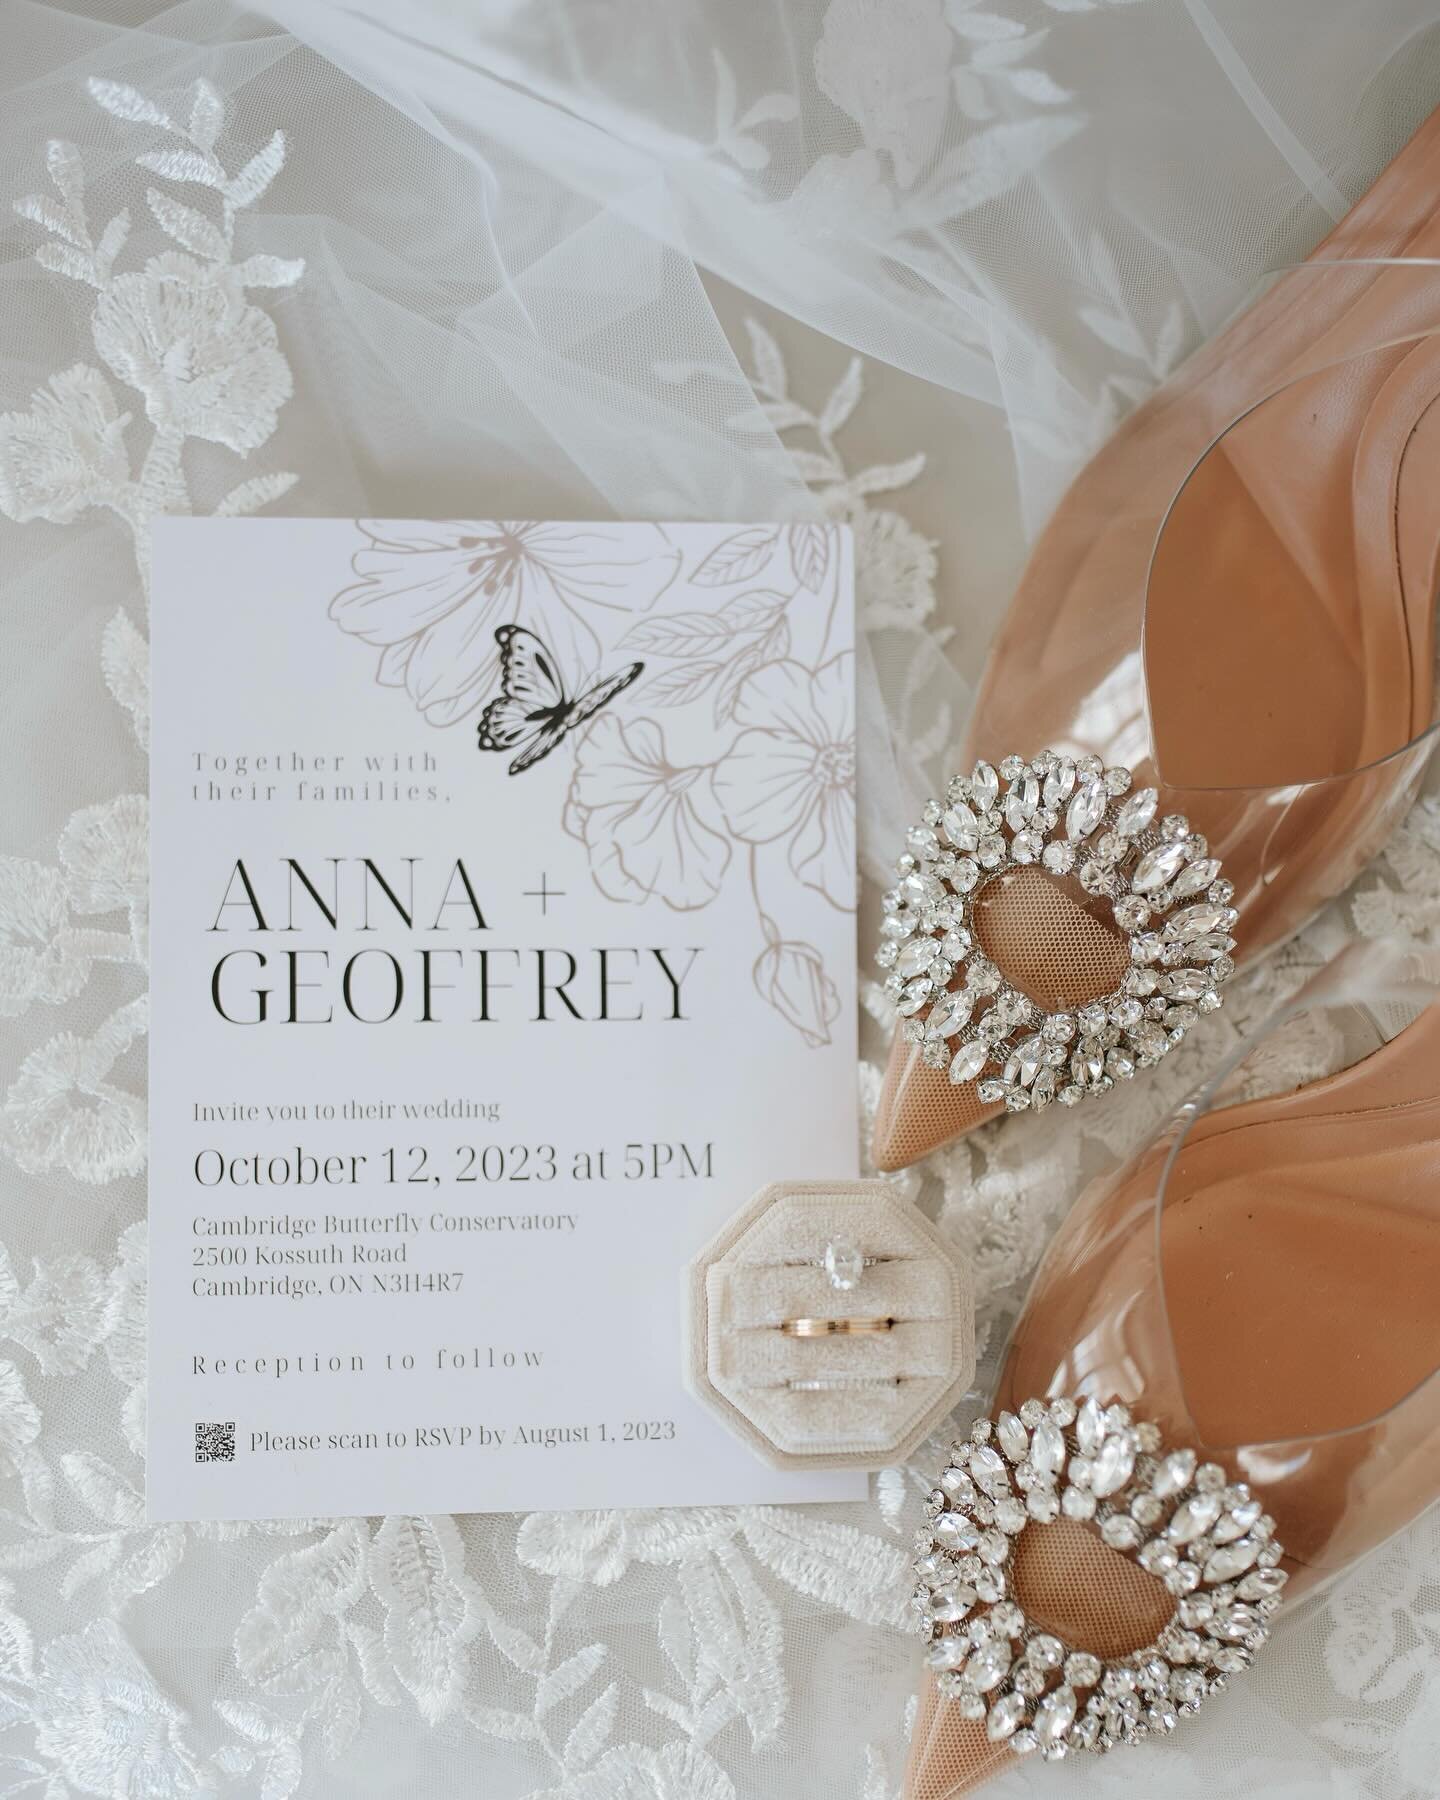 Let the delicate wings symbolize new beginnings and the beauty of your union. Releasing butterflies during the ceremony marks the start of a vibrant and harmonious chapter together
.
@reetsframeofmind 
@_tonysal 
@cambridgebutterflyweddings 
@windy.c